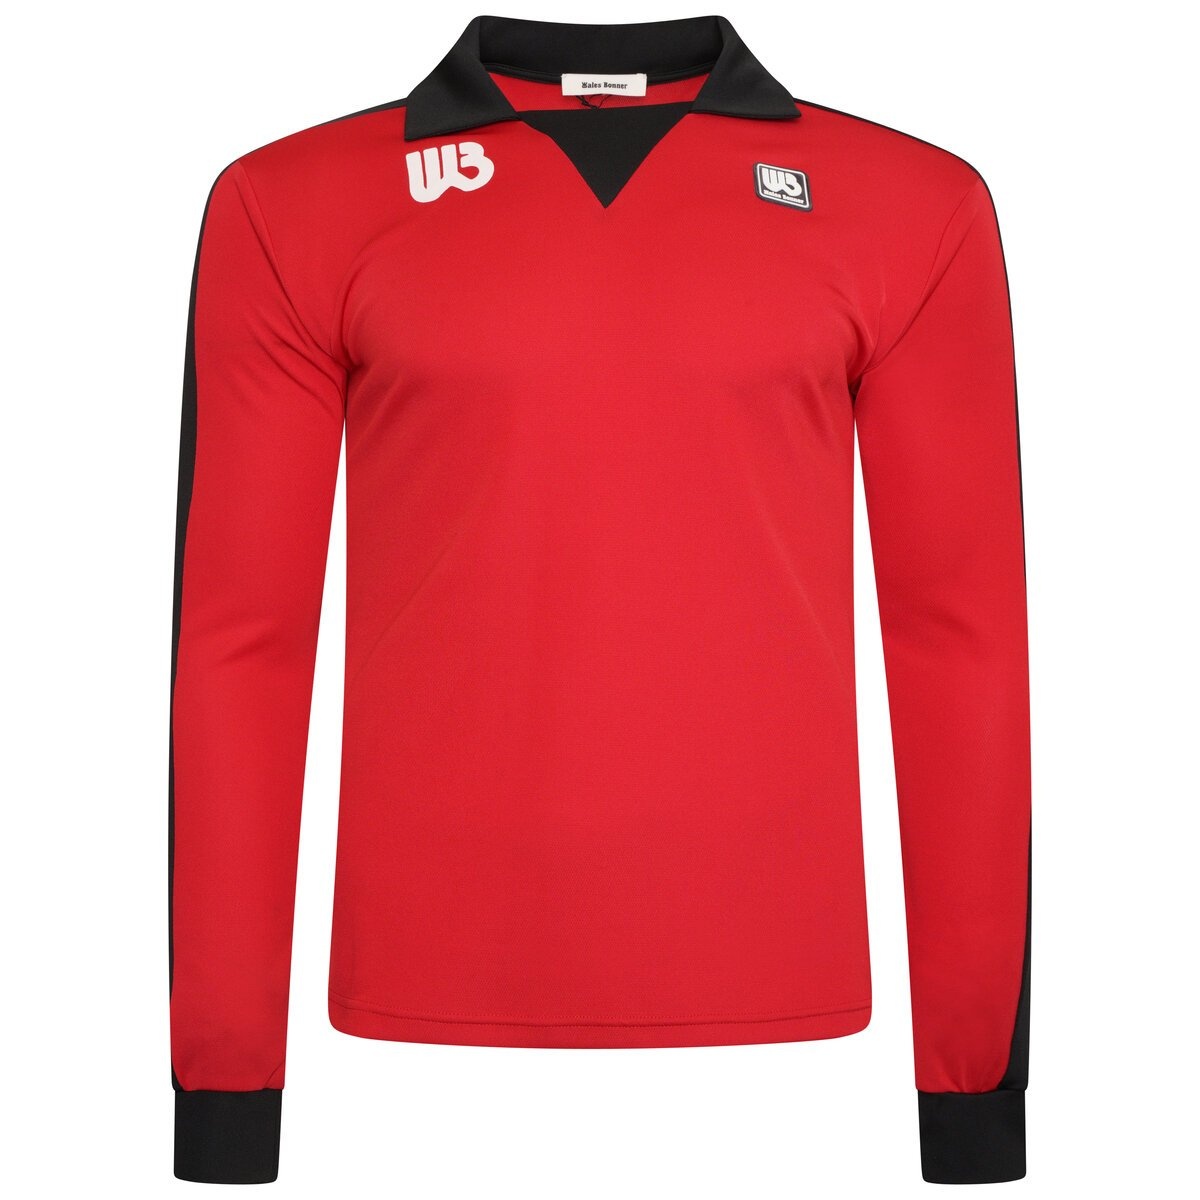 Home Jersey Shirt in Red/black - 1